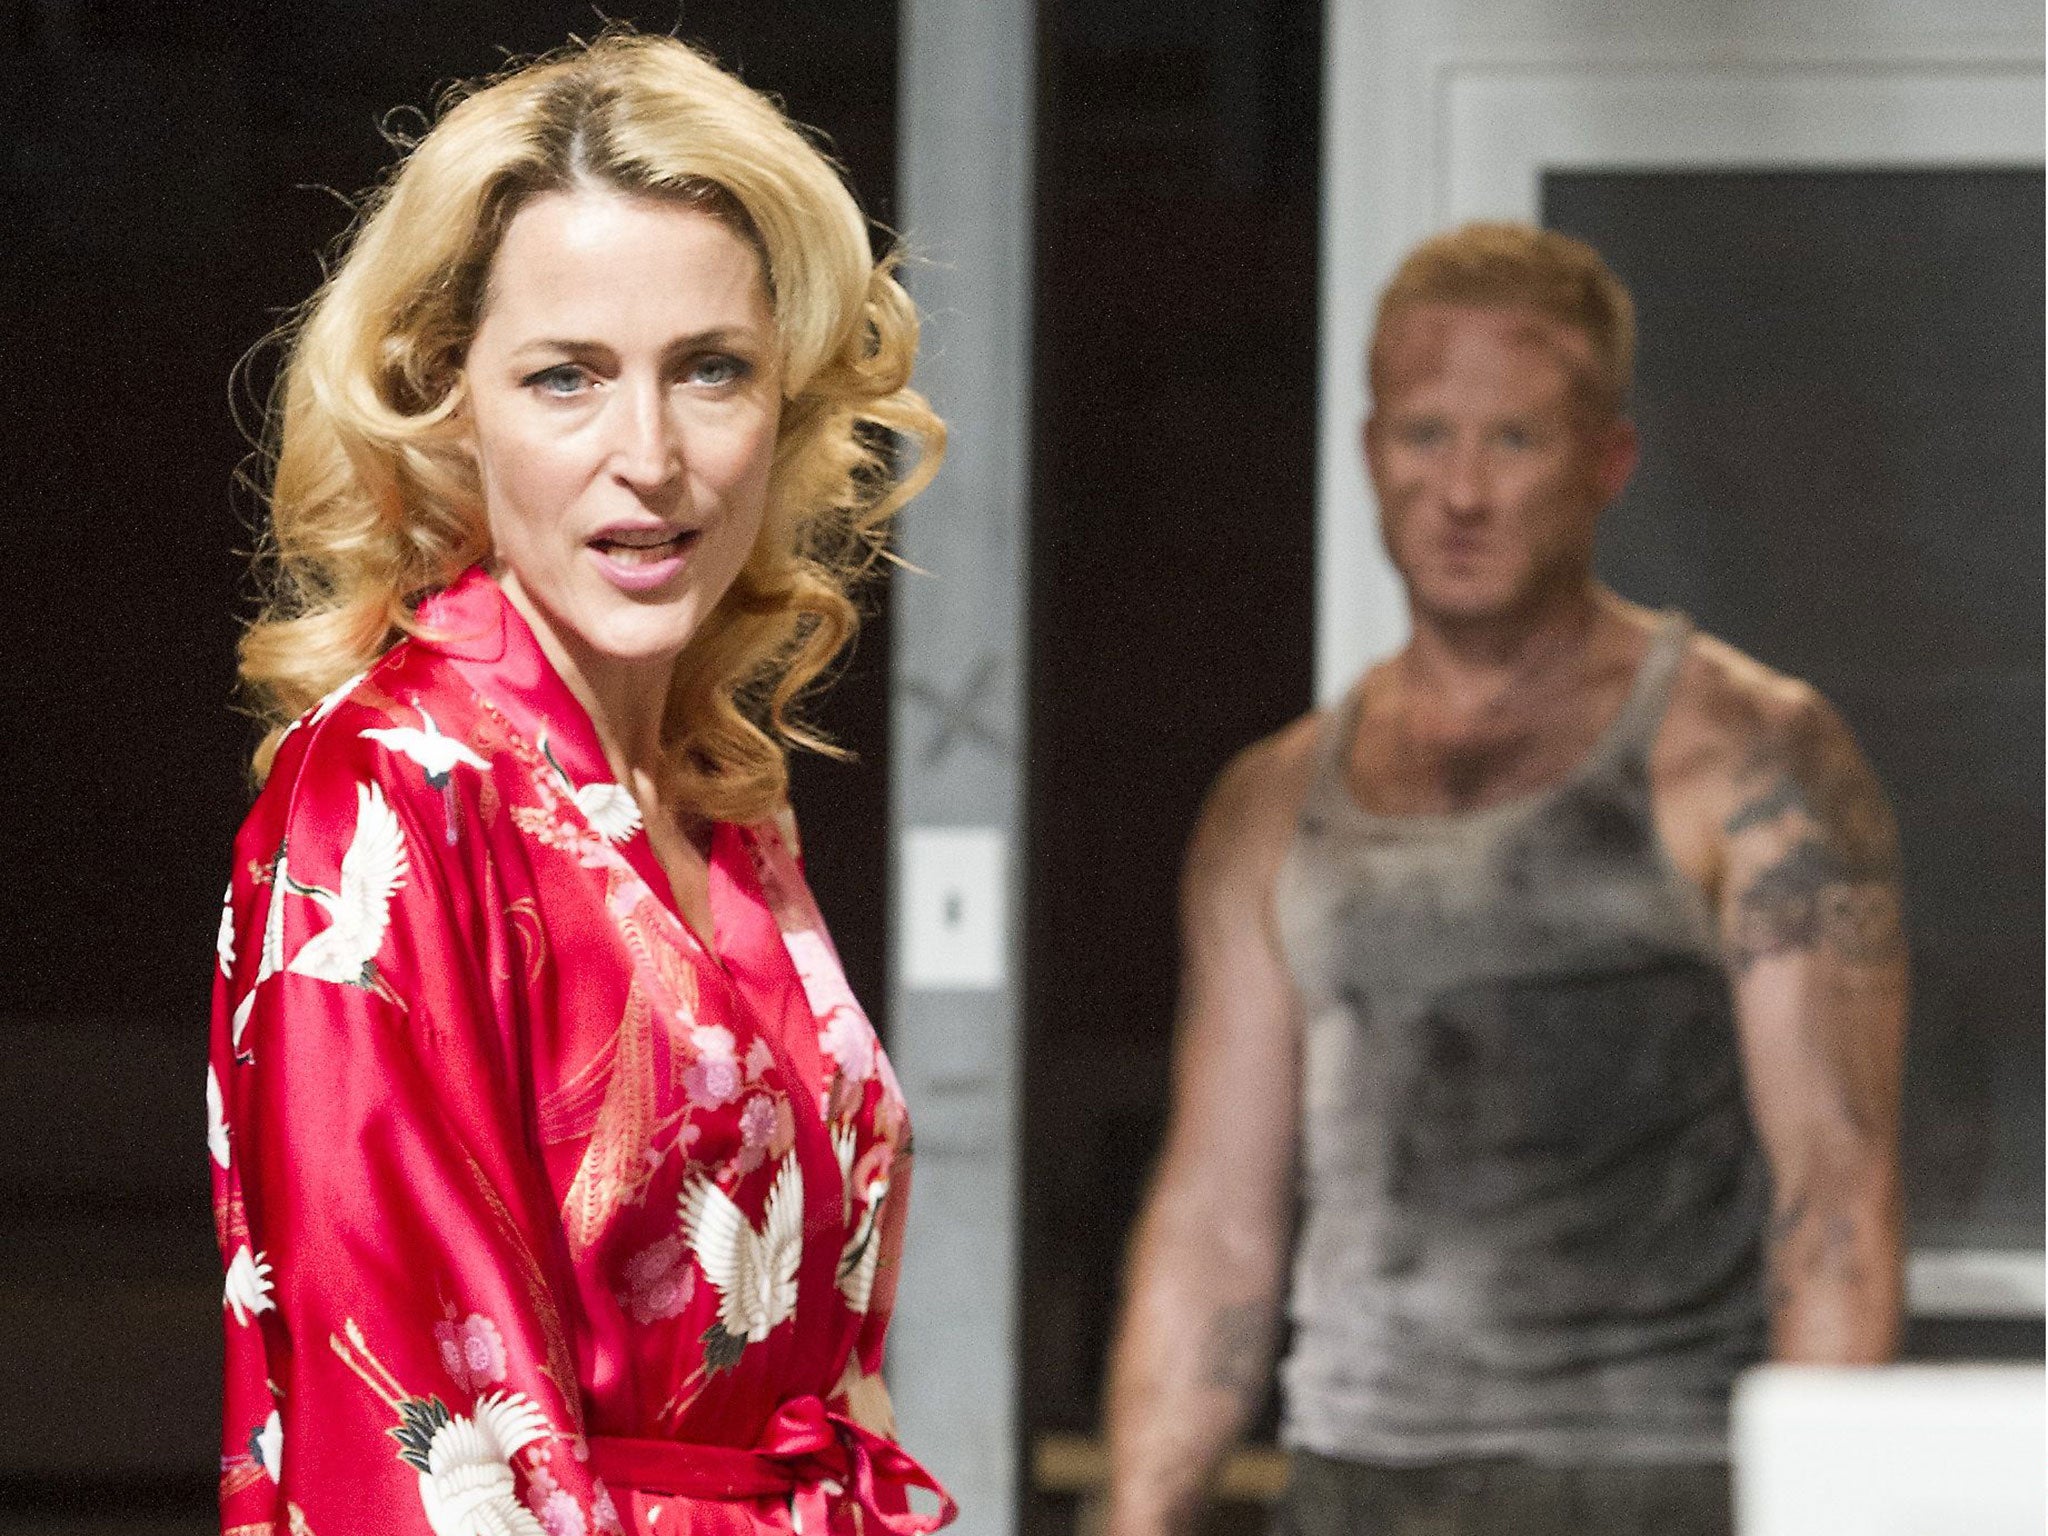 Gillian Anderson as Blanche DuBois and Ben Foster as Stanley in ‘A Streetcar Named Desire’